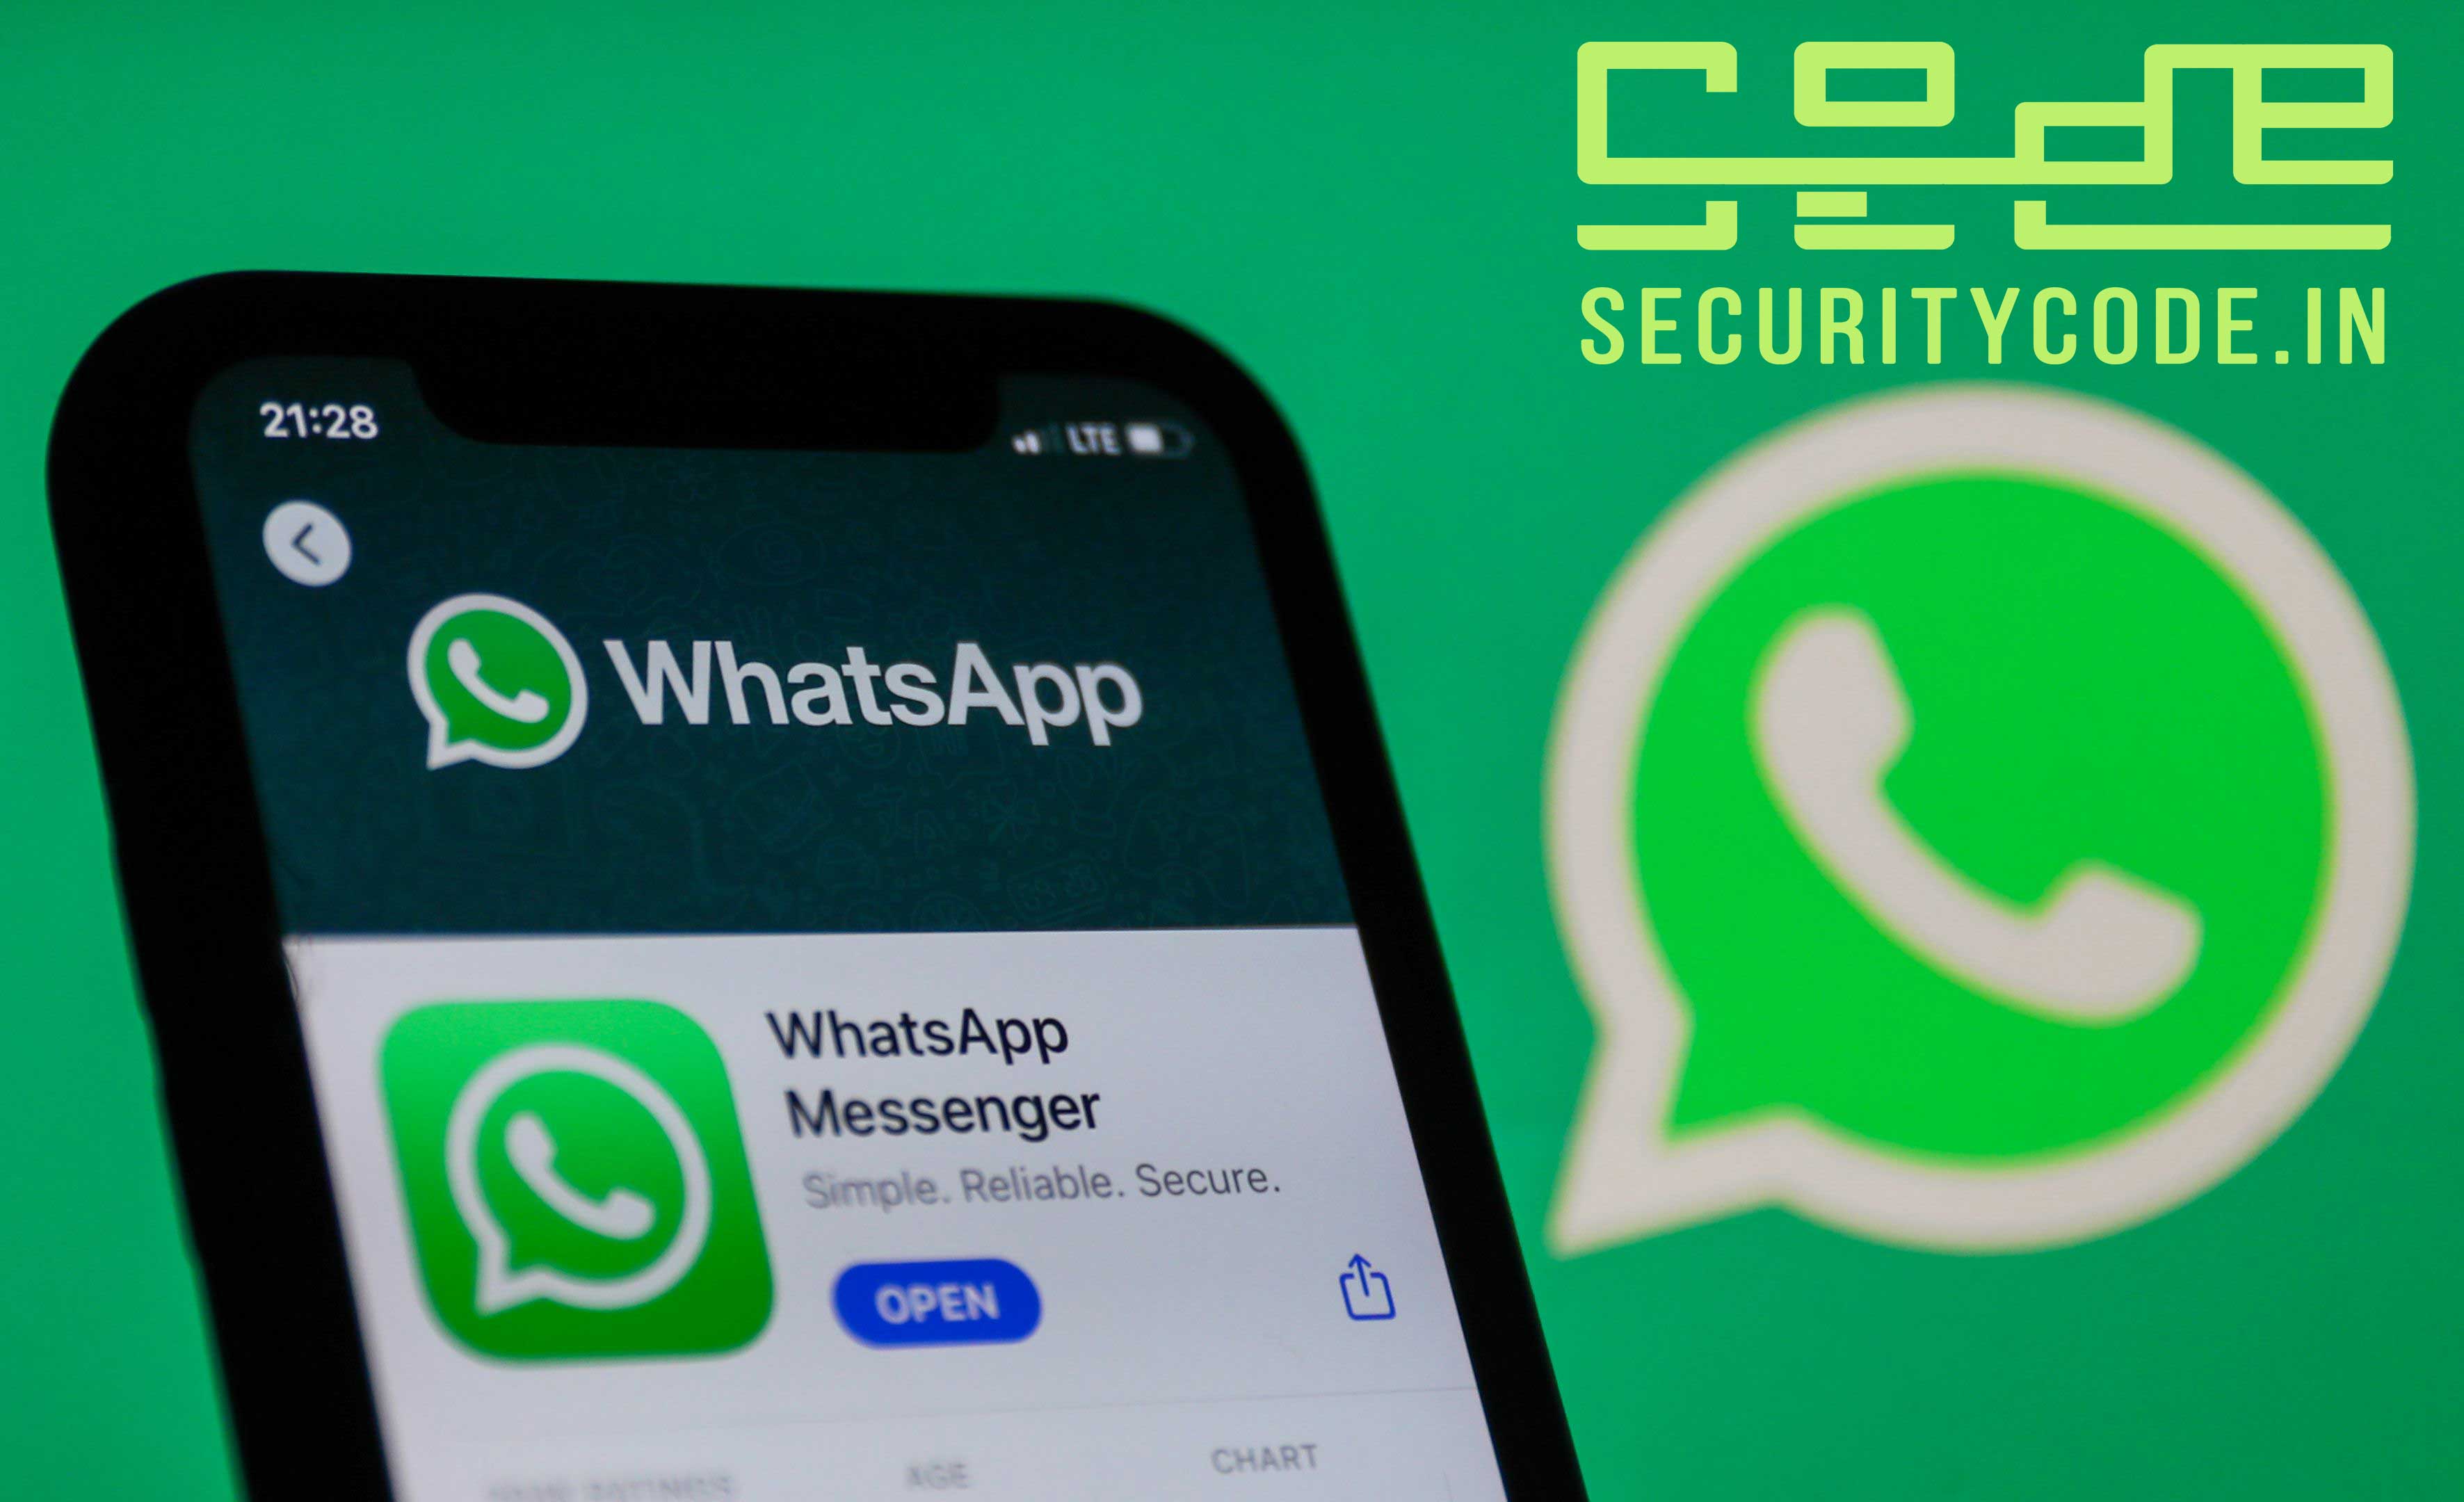 Can Others Access WhatsApp Content